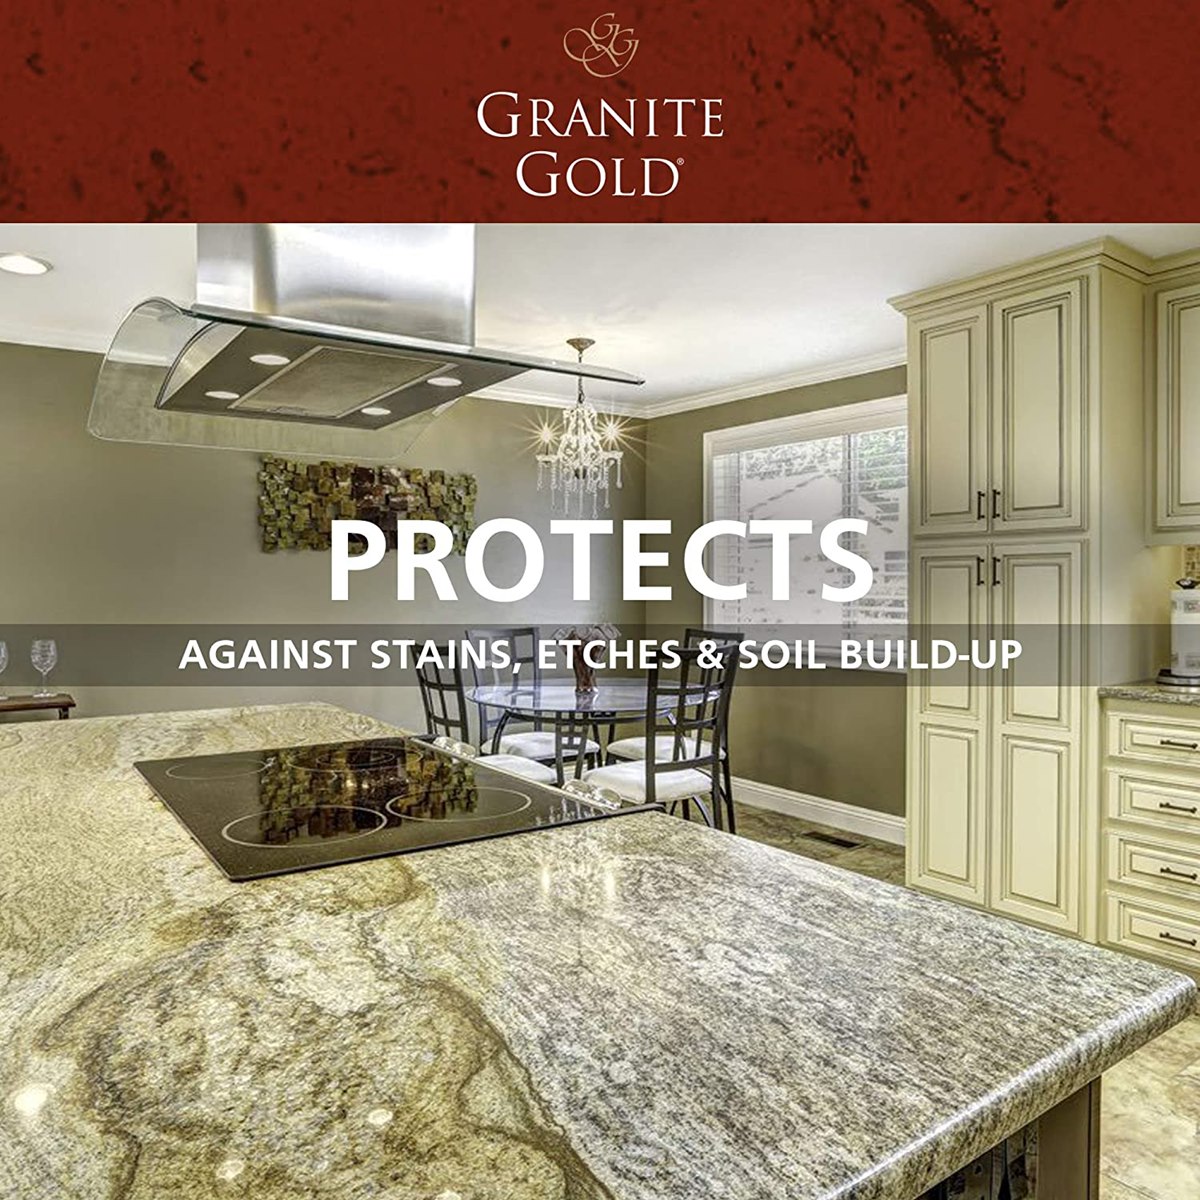 How to Protect a Granite Worktop against stains